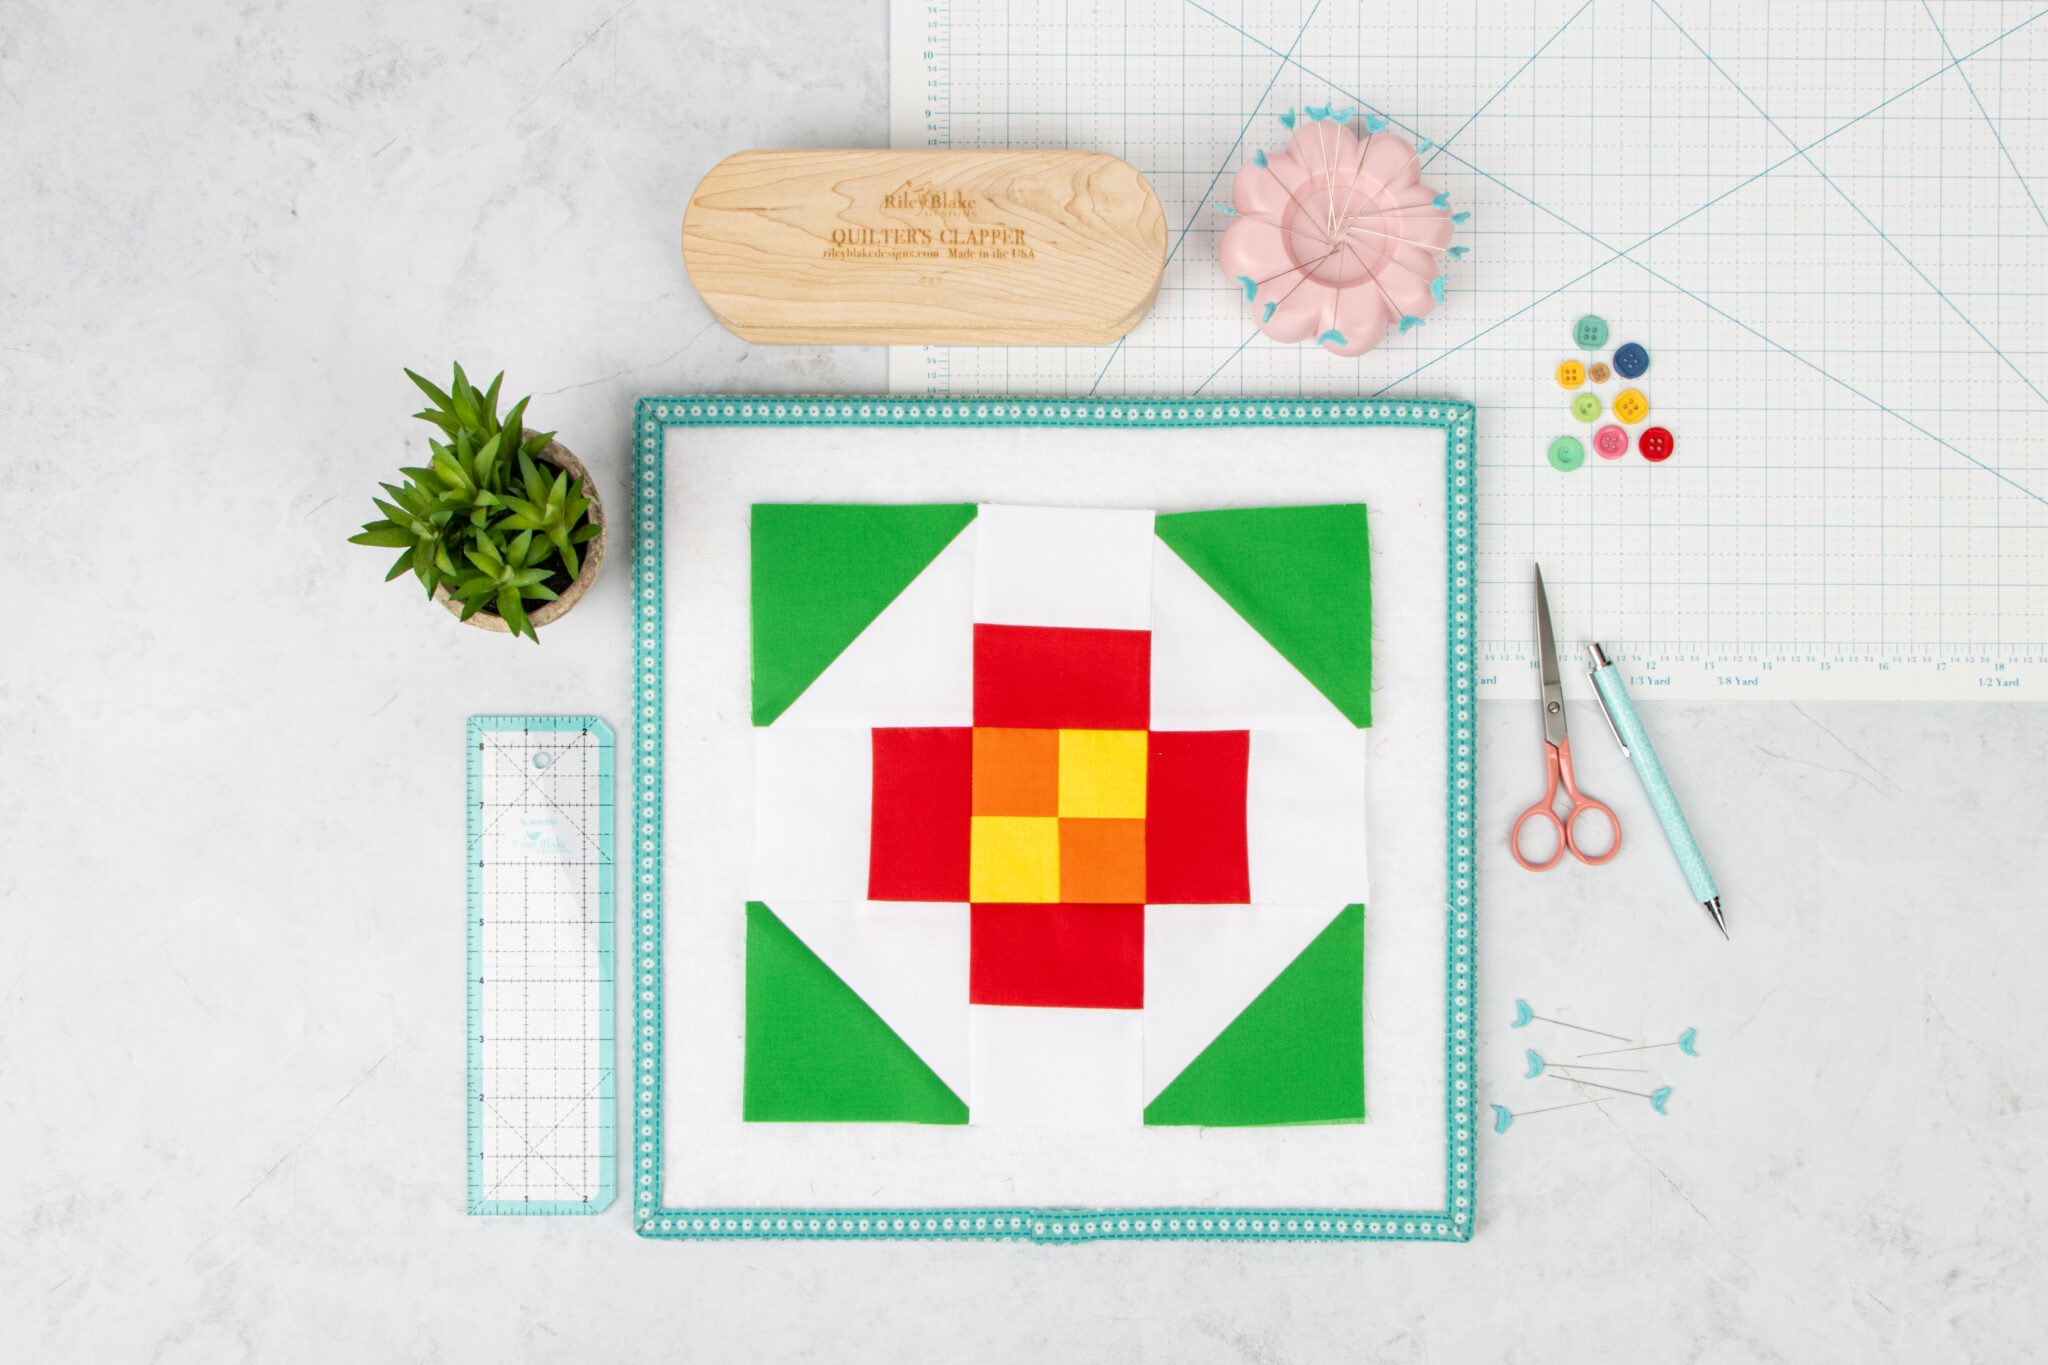 red, yellow and green quilt block with sewing notions